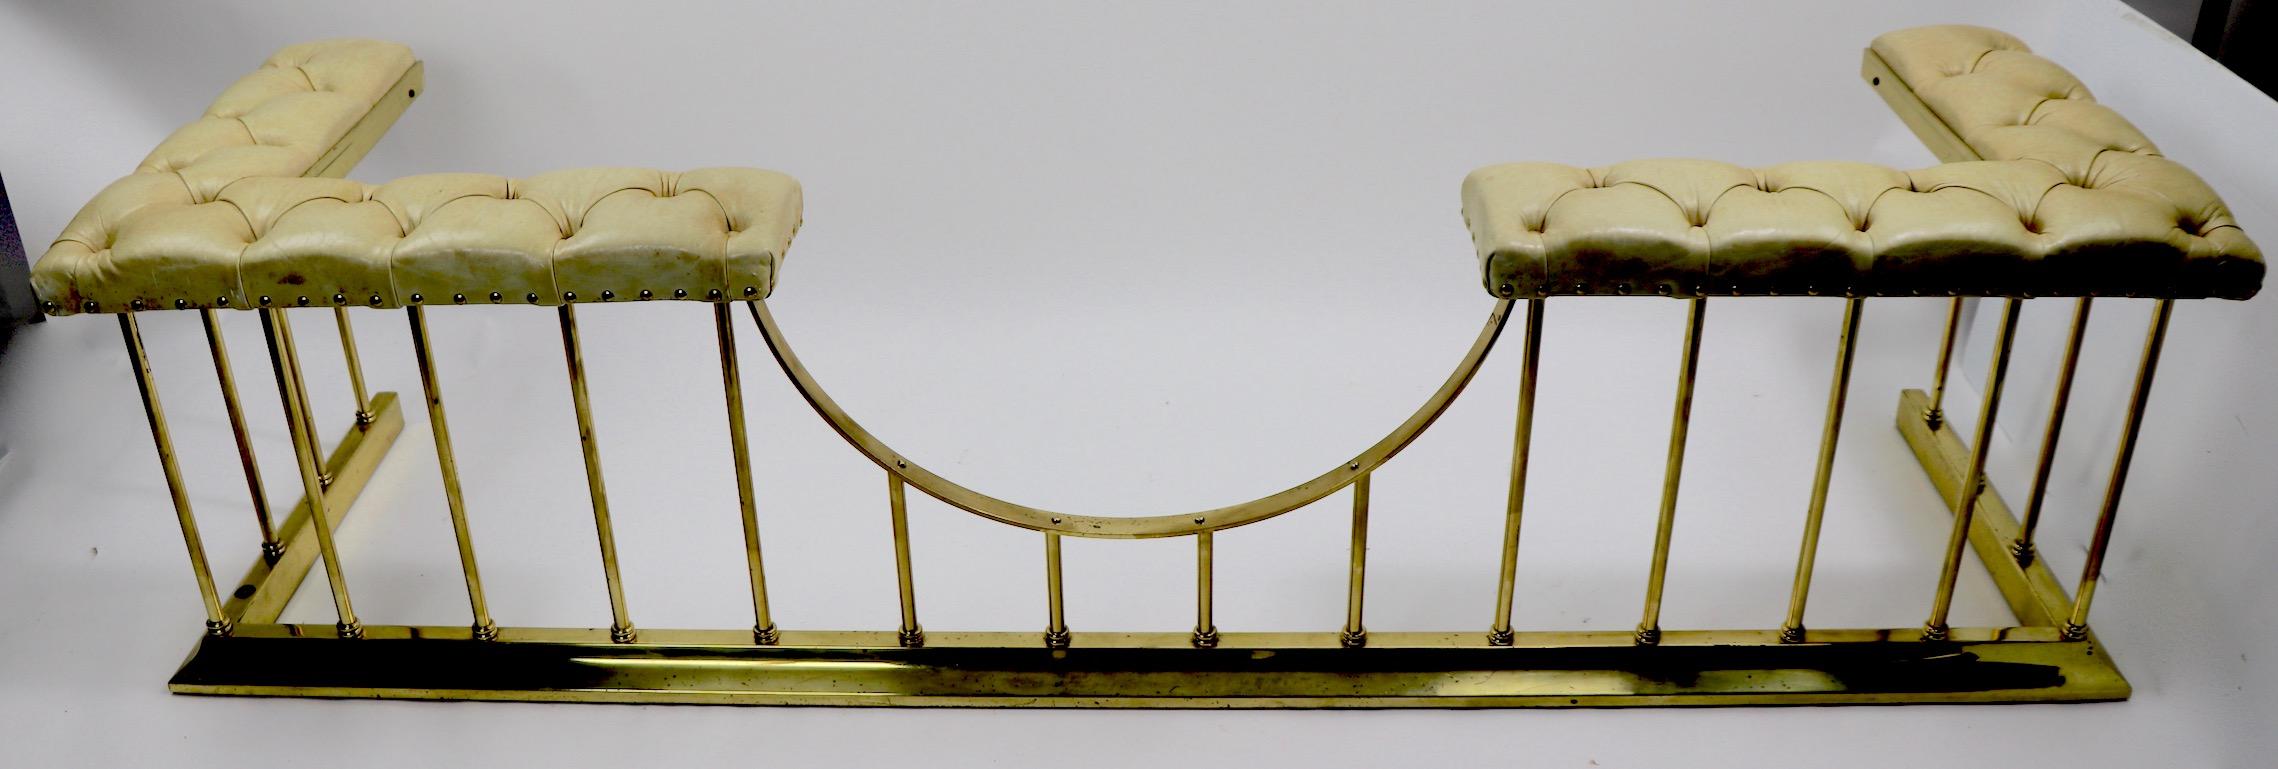 American Classical Large Scale Bench Club Fender in Brass and Leather